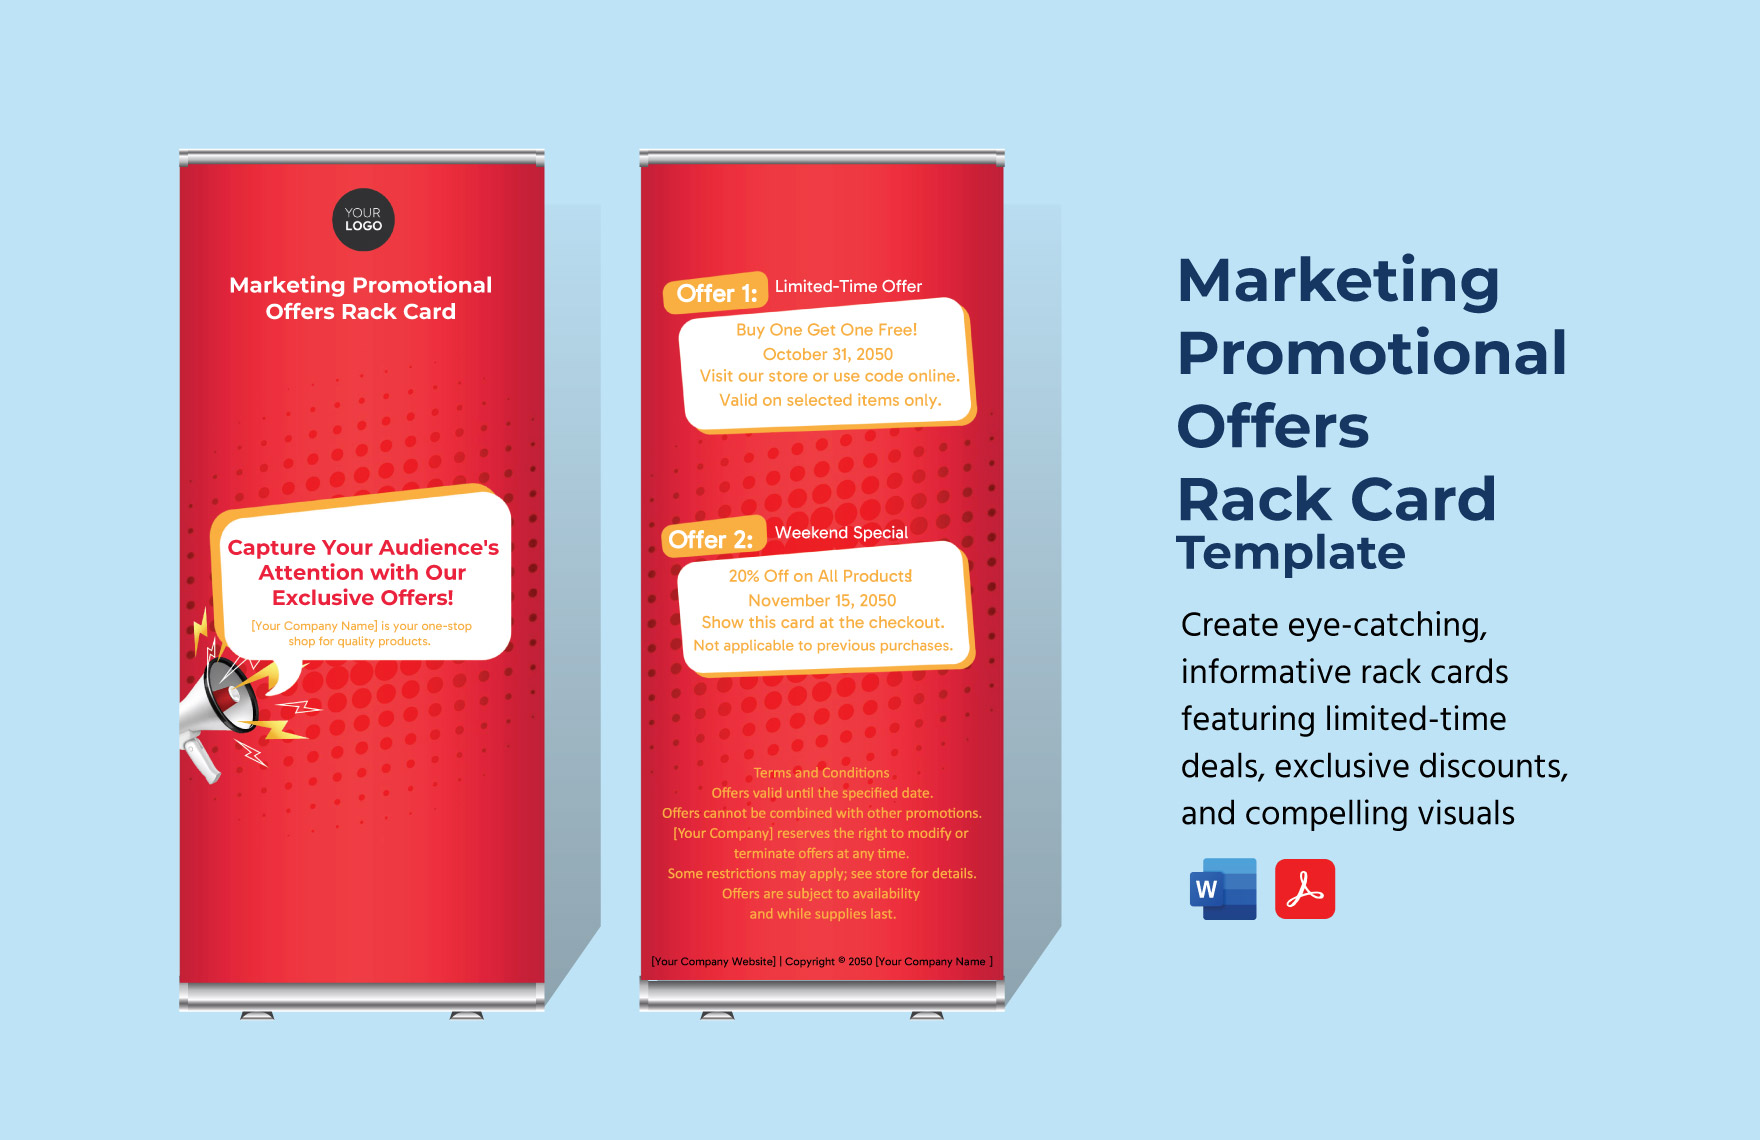 Marketing Promotional Offers Rack Card Template